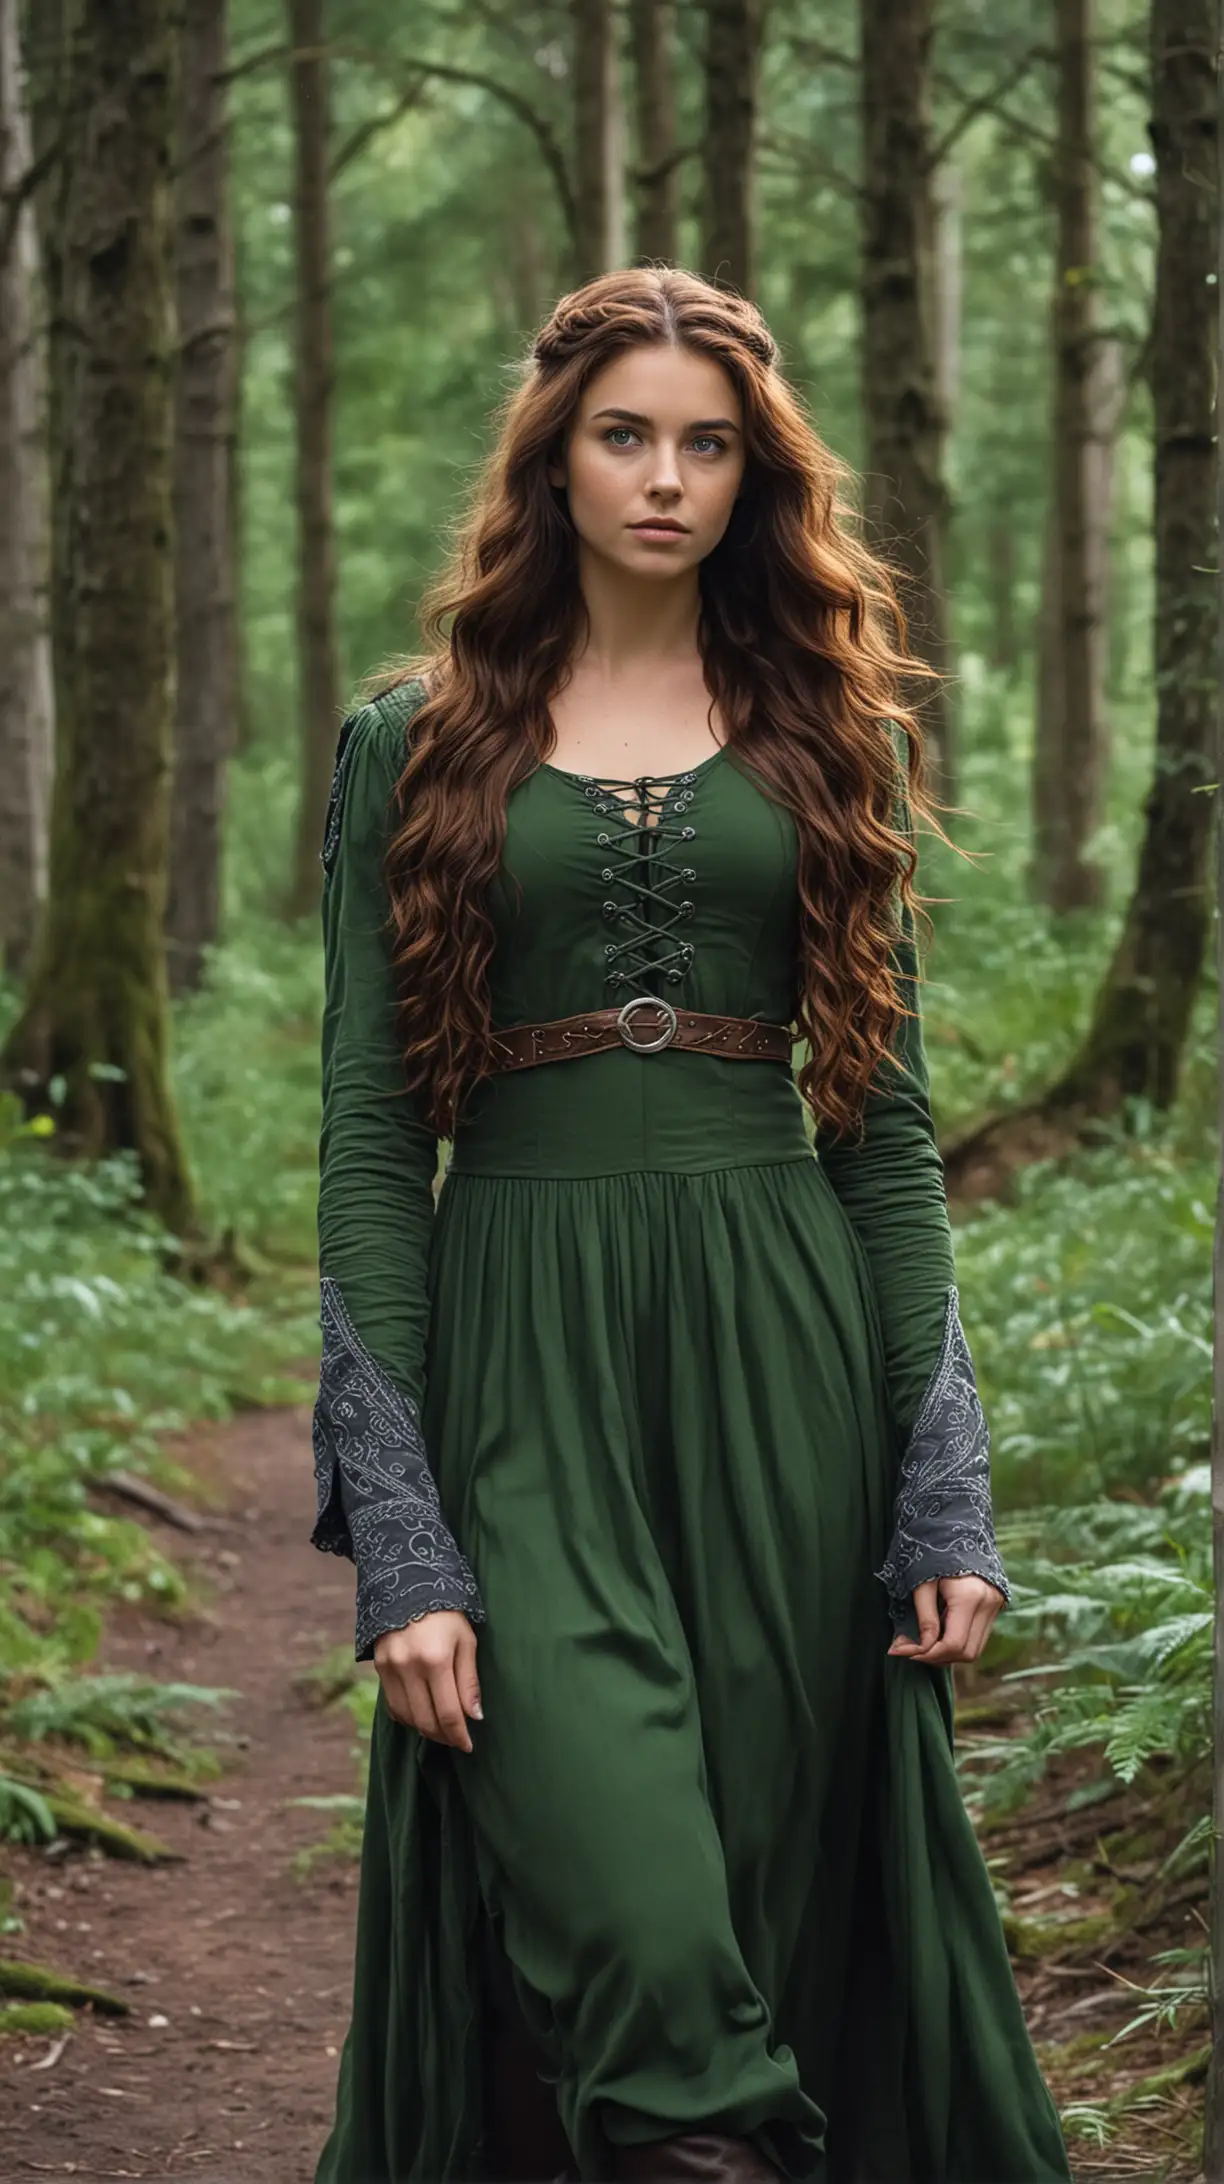 18-year-old girl Julie Roberts with long, wavy, dark-auburn hair, and intense green eyes. She is wearing a Vikings dress while walking in a forest.